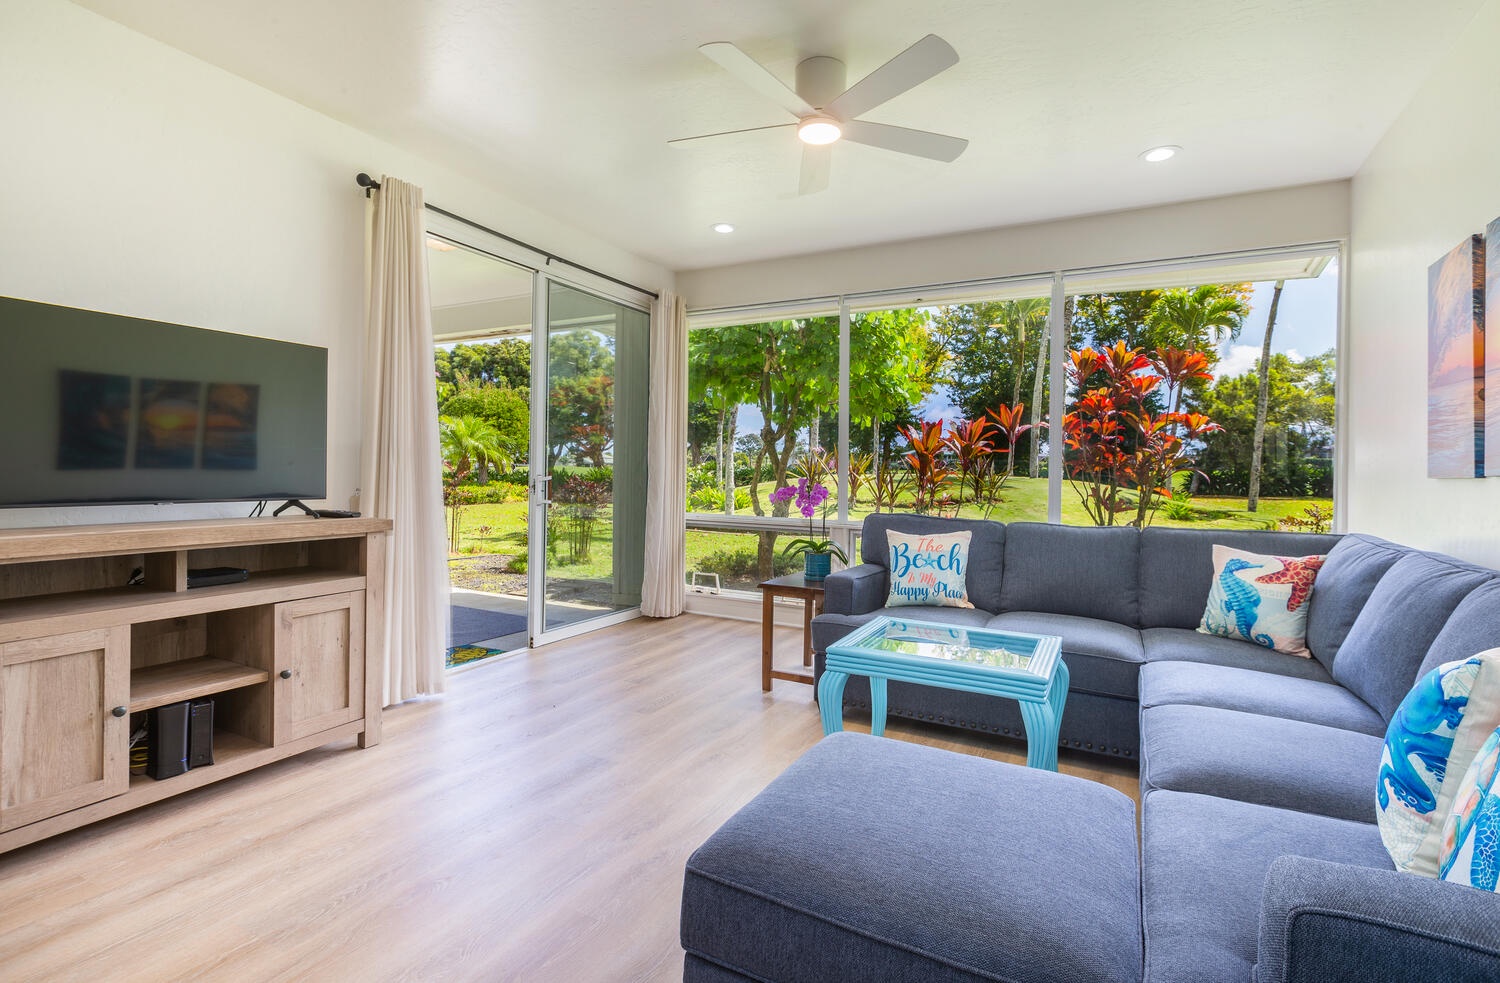 Princeville Vacation Rentals, Emmalani Court 414 - Relax and enjoy the natural light from the comfort of the living room